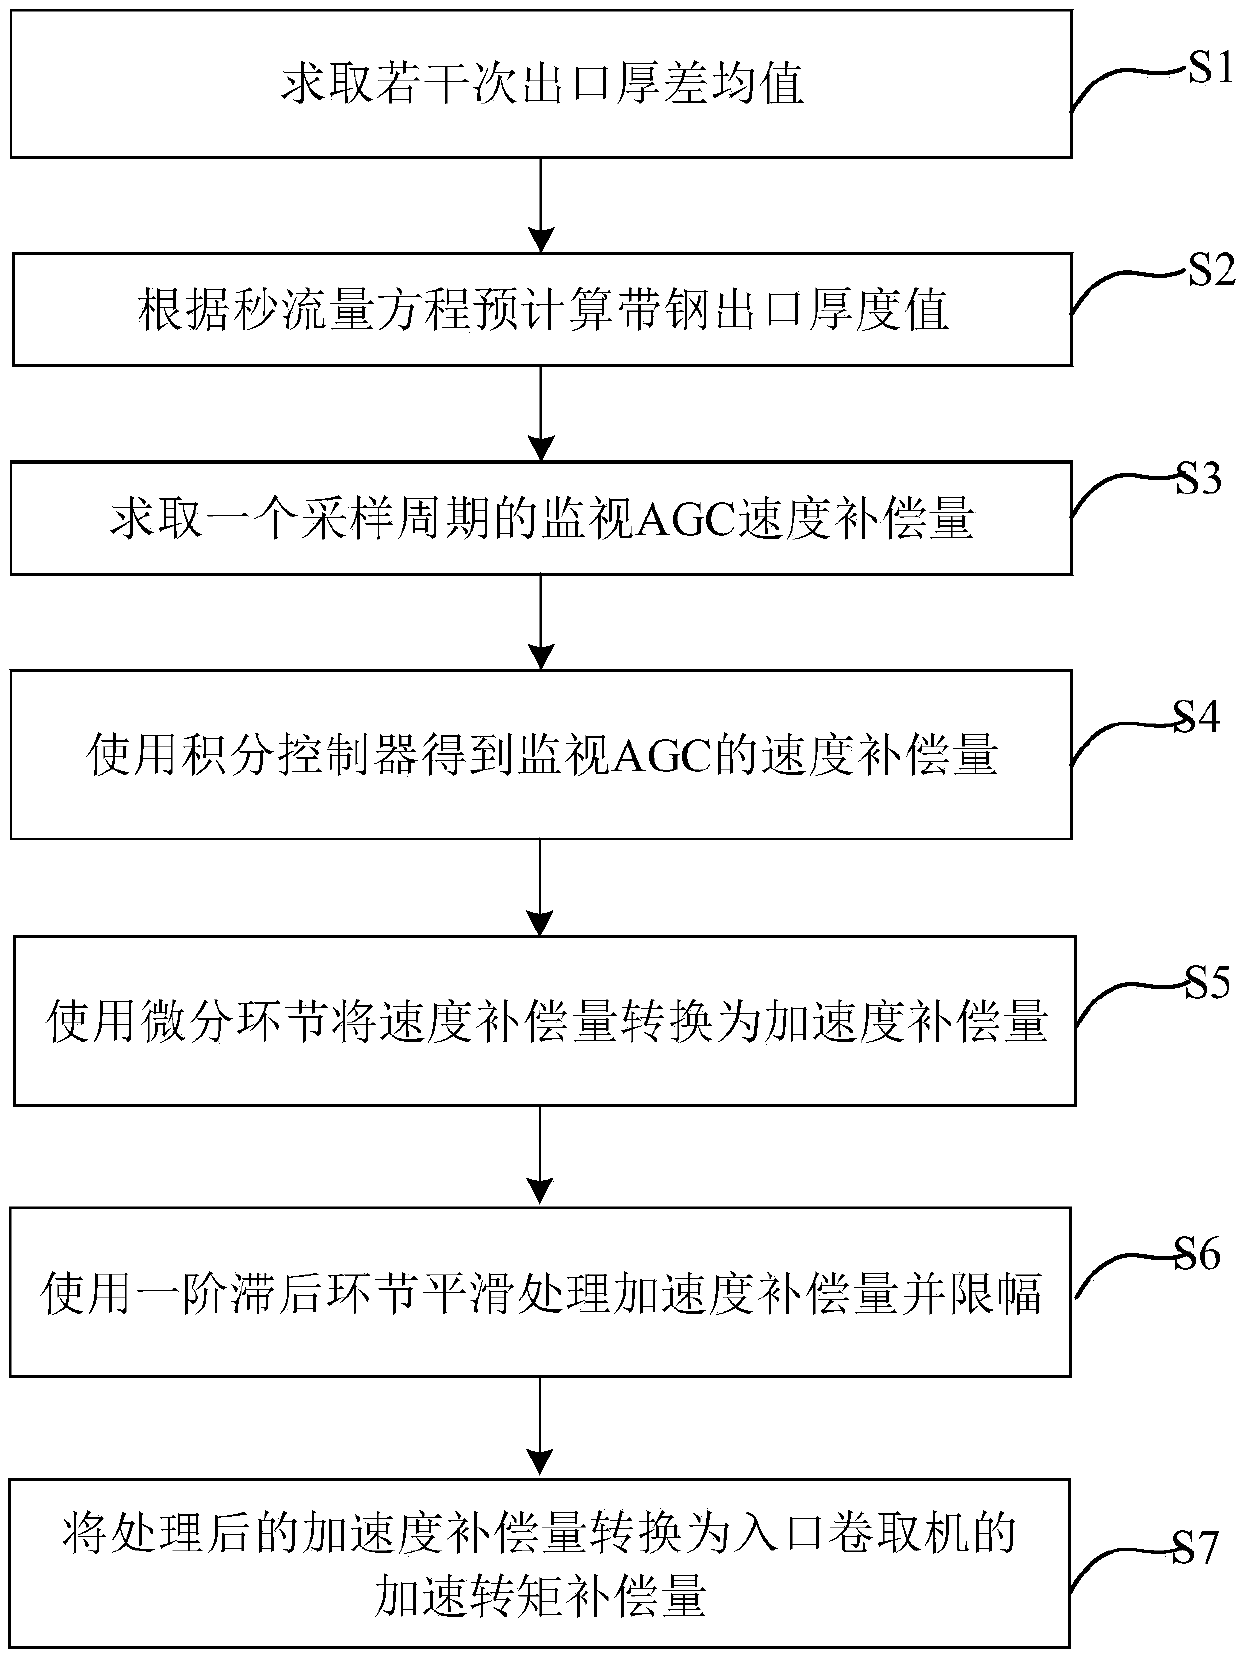 Inlet tension feed forward compensation method and system adopting monitoring automatic gauge control (AGC)